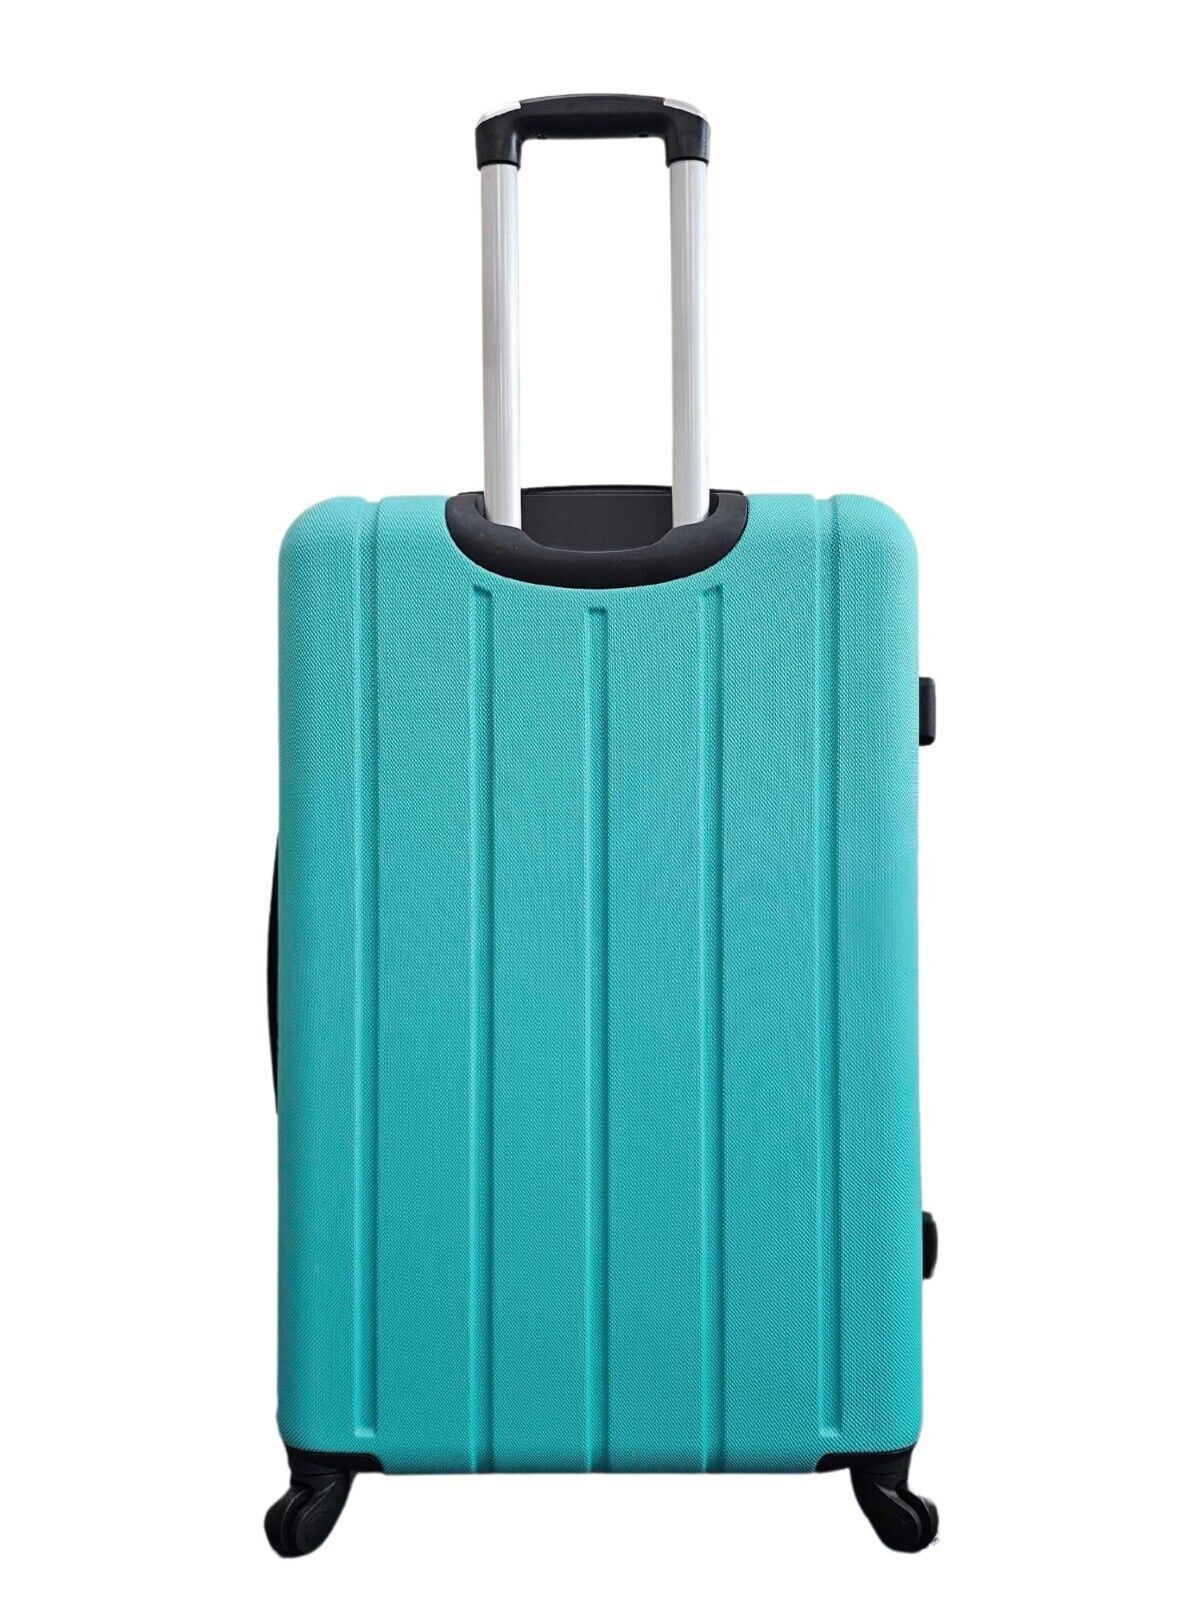 Robust ABS Hard Shell Luggage Suitcase